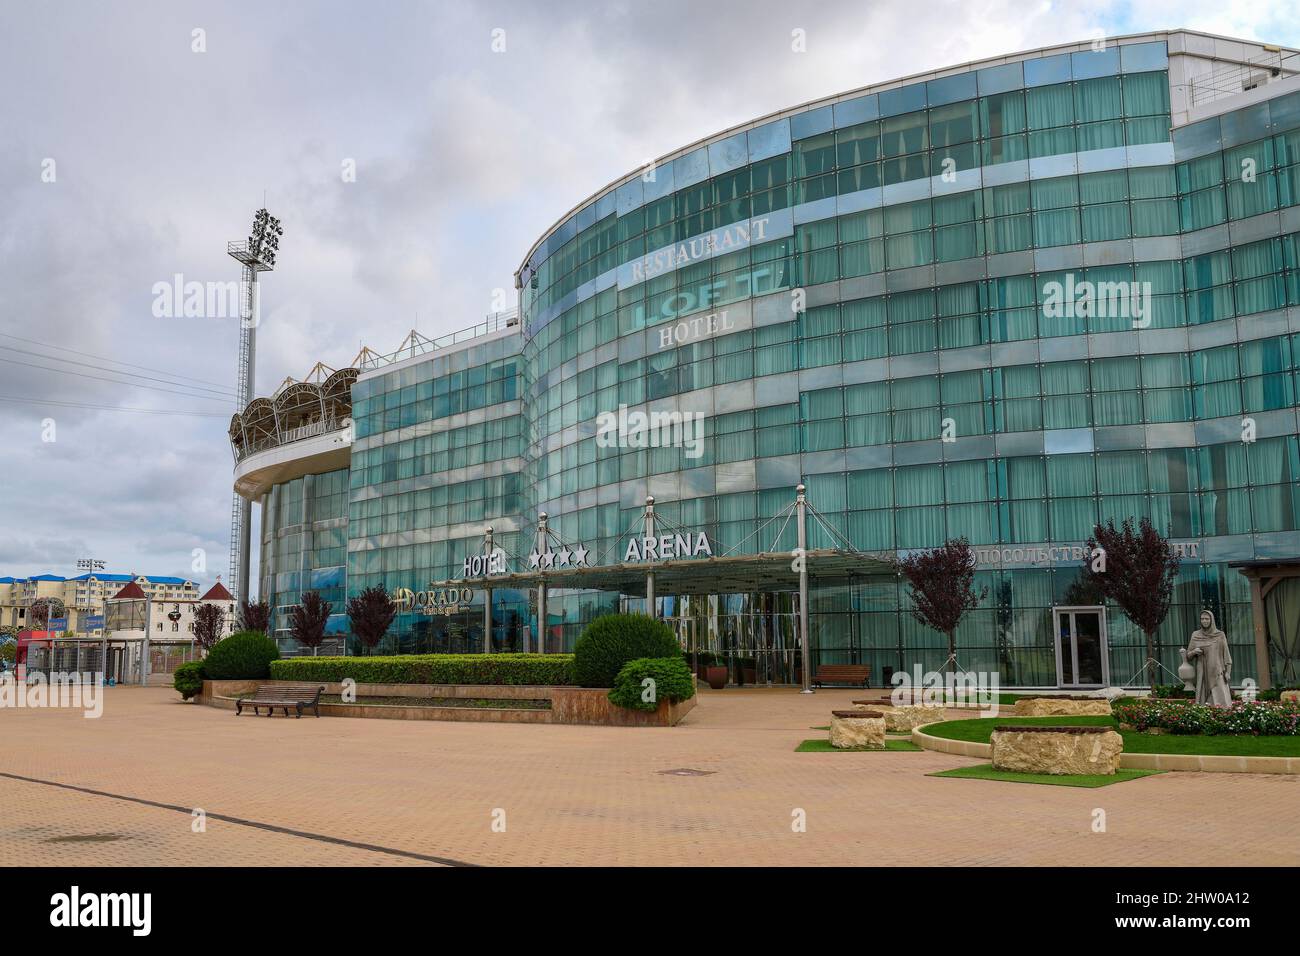 KASPIYSK, RUSSIA - SEPTEMBER 23, 2021: Facade of Anji Arena sports complex on a cloudy September day. The Republic of Dagestan Stock Photo